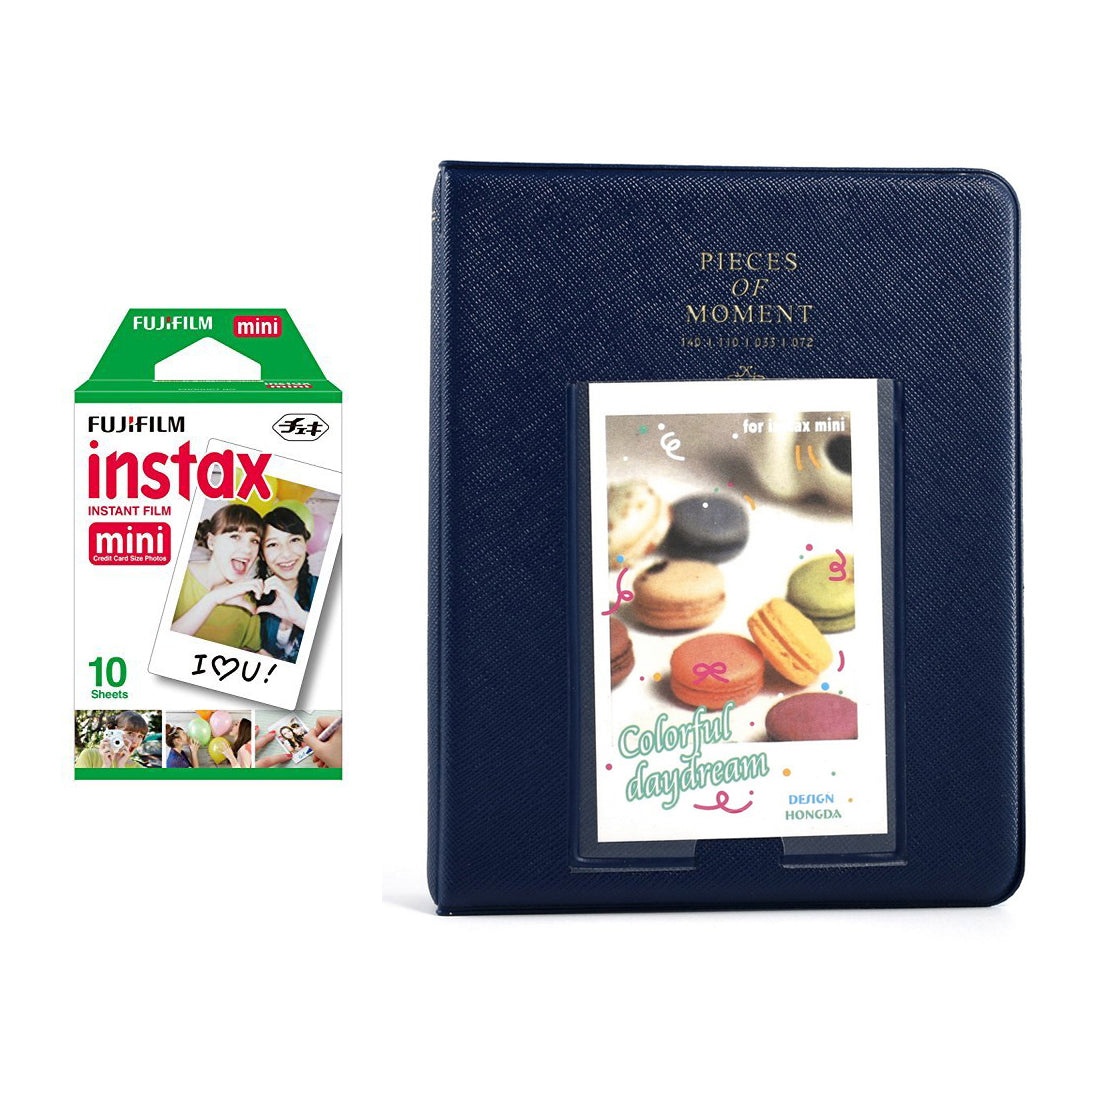 Fujifilm Instax Mini Single Pack 10 Sheets Instant Film with Instax Time Photo Album 64 Sheets Navy blue